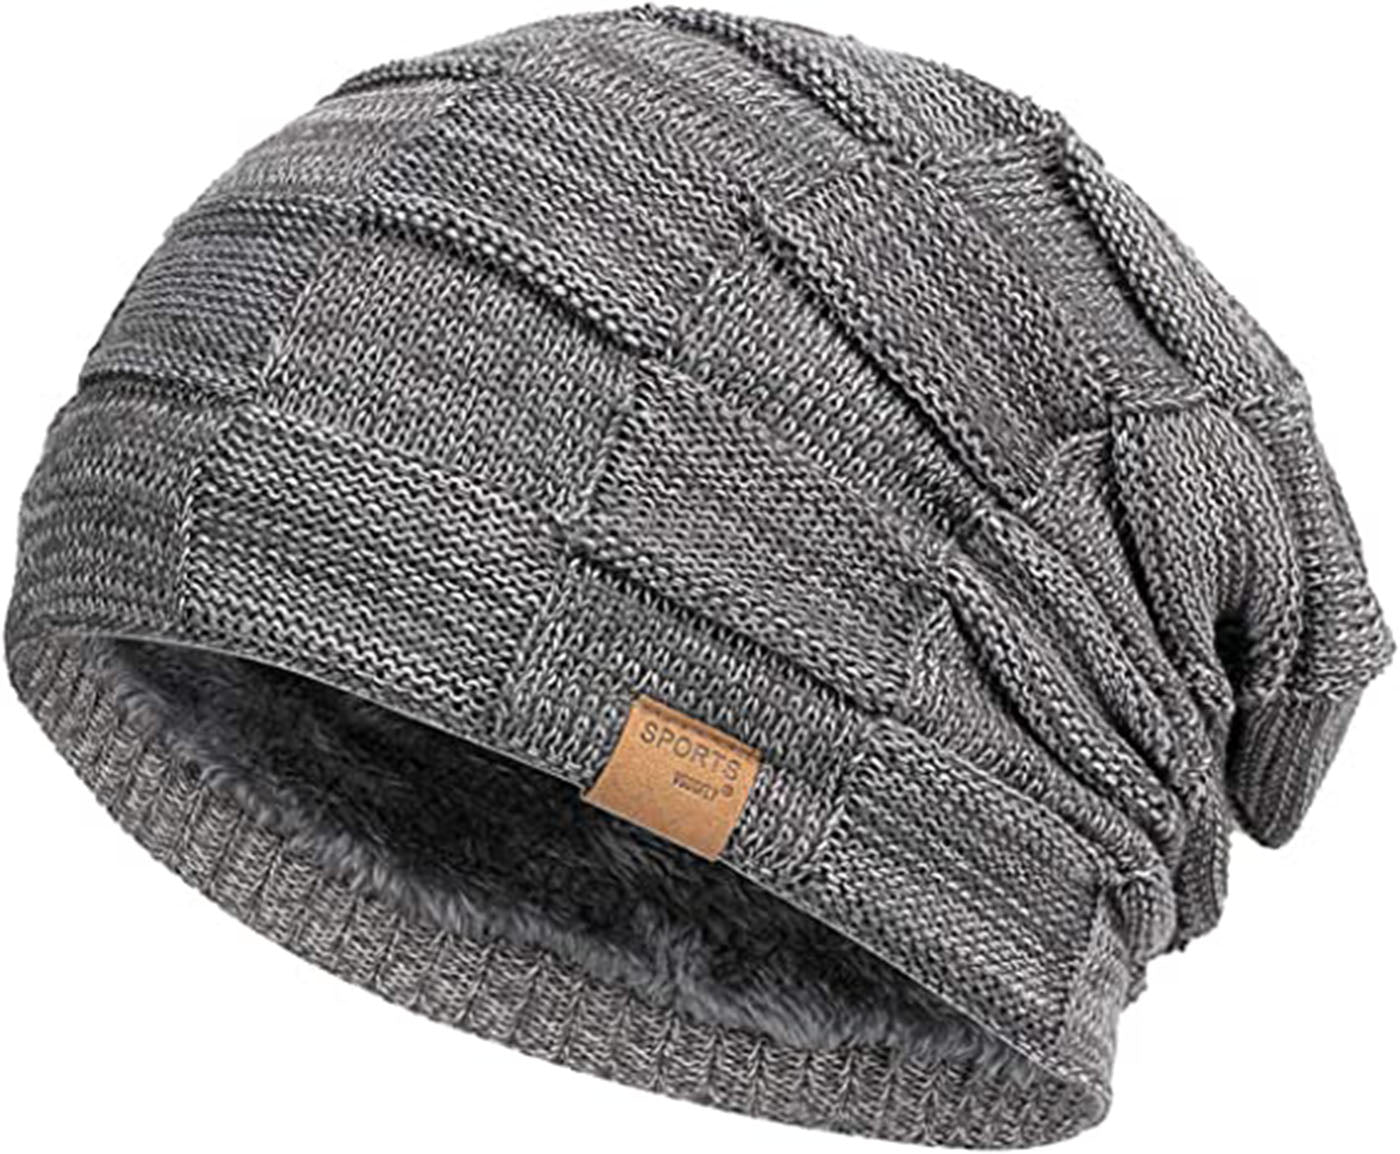 Beanie for Men Winter Hats for Guys Cool Beanies Mens Lined Knit Warm Thick Skully Stocking Binie Hat